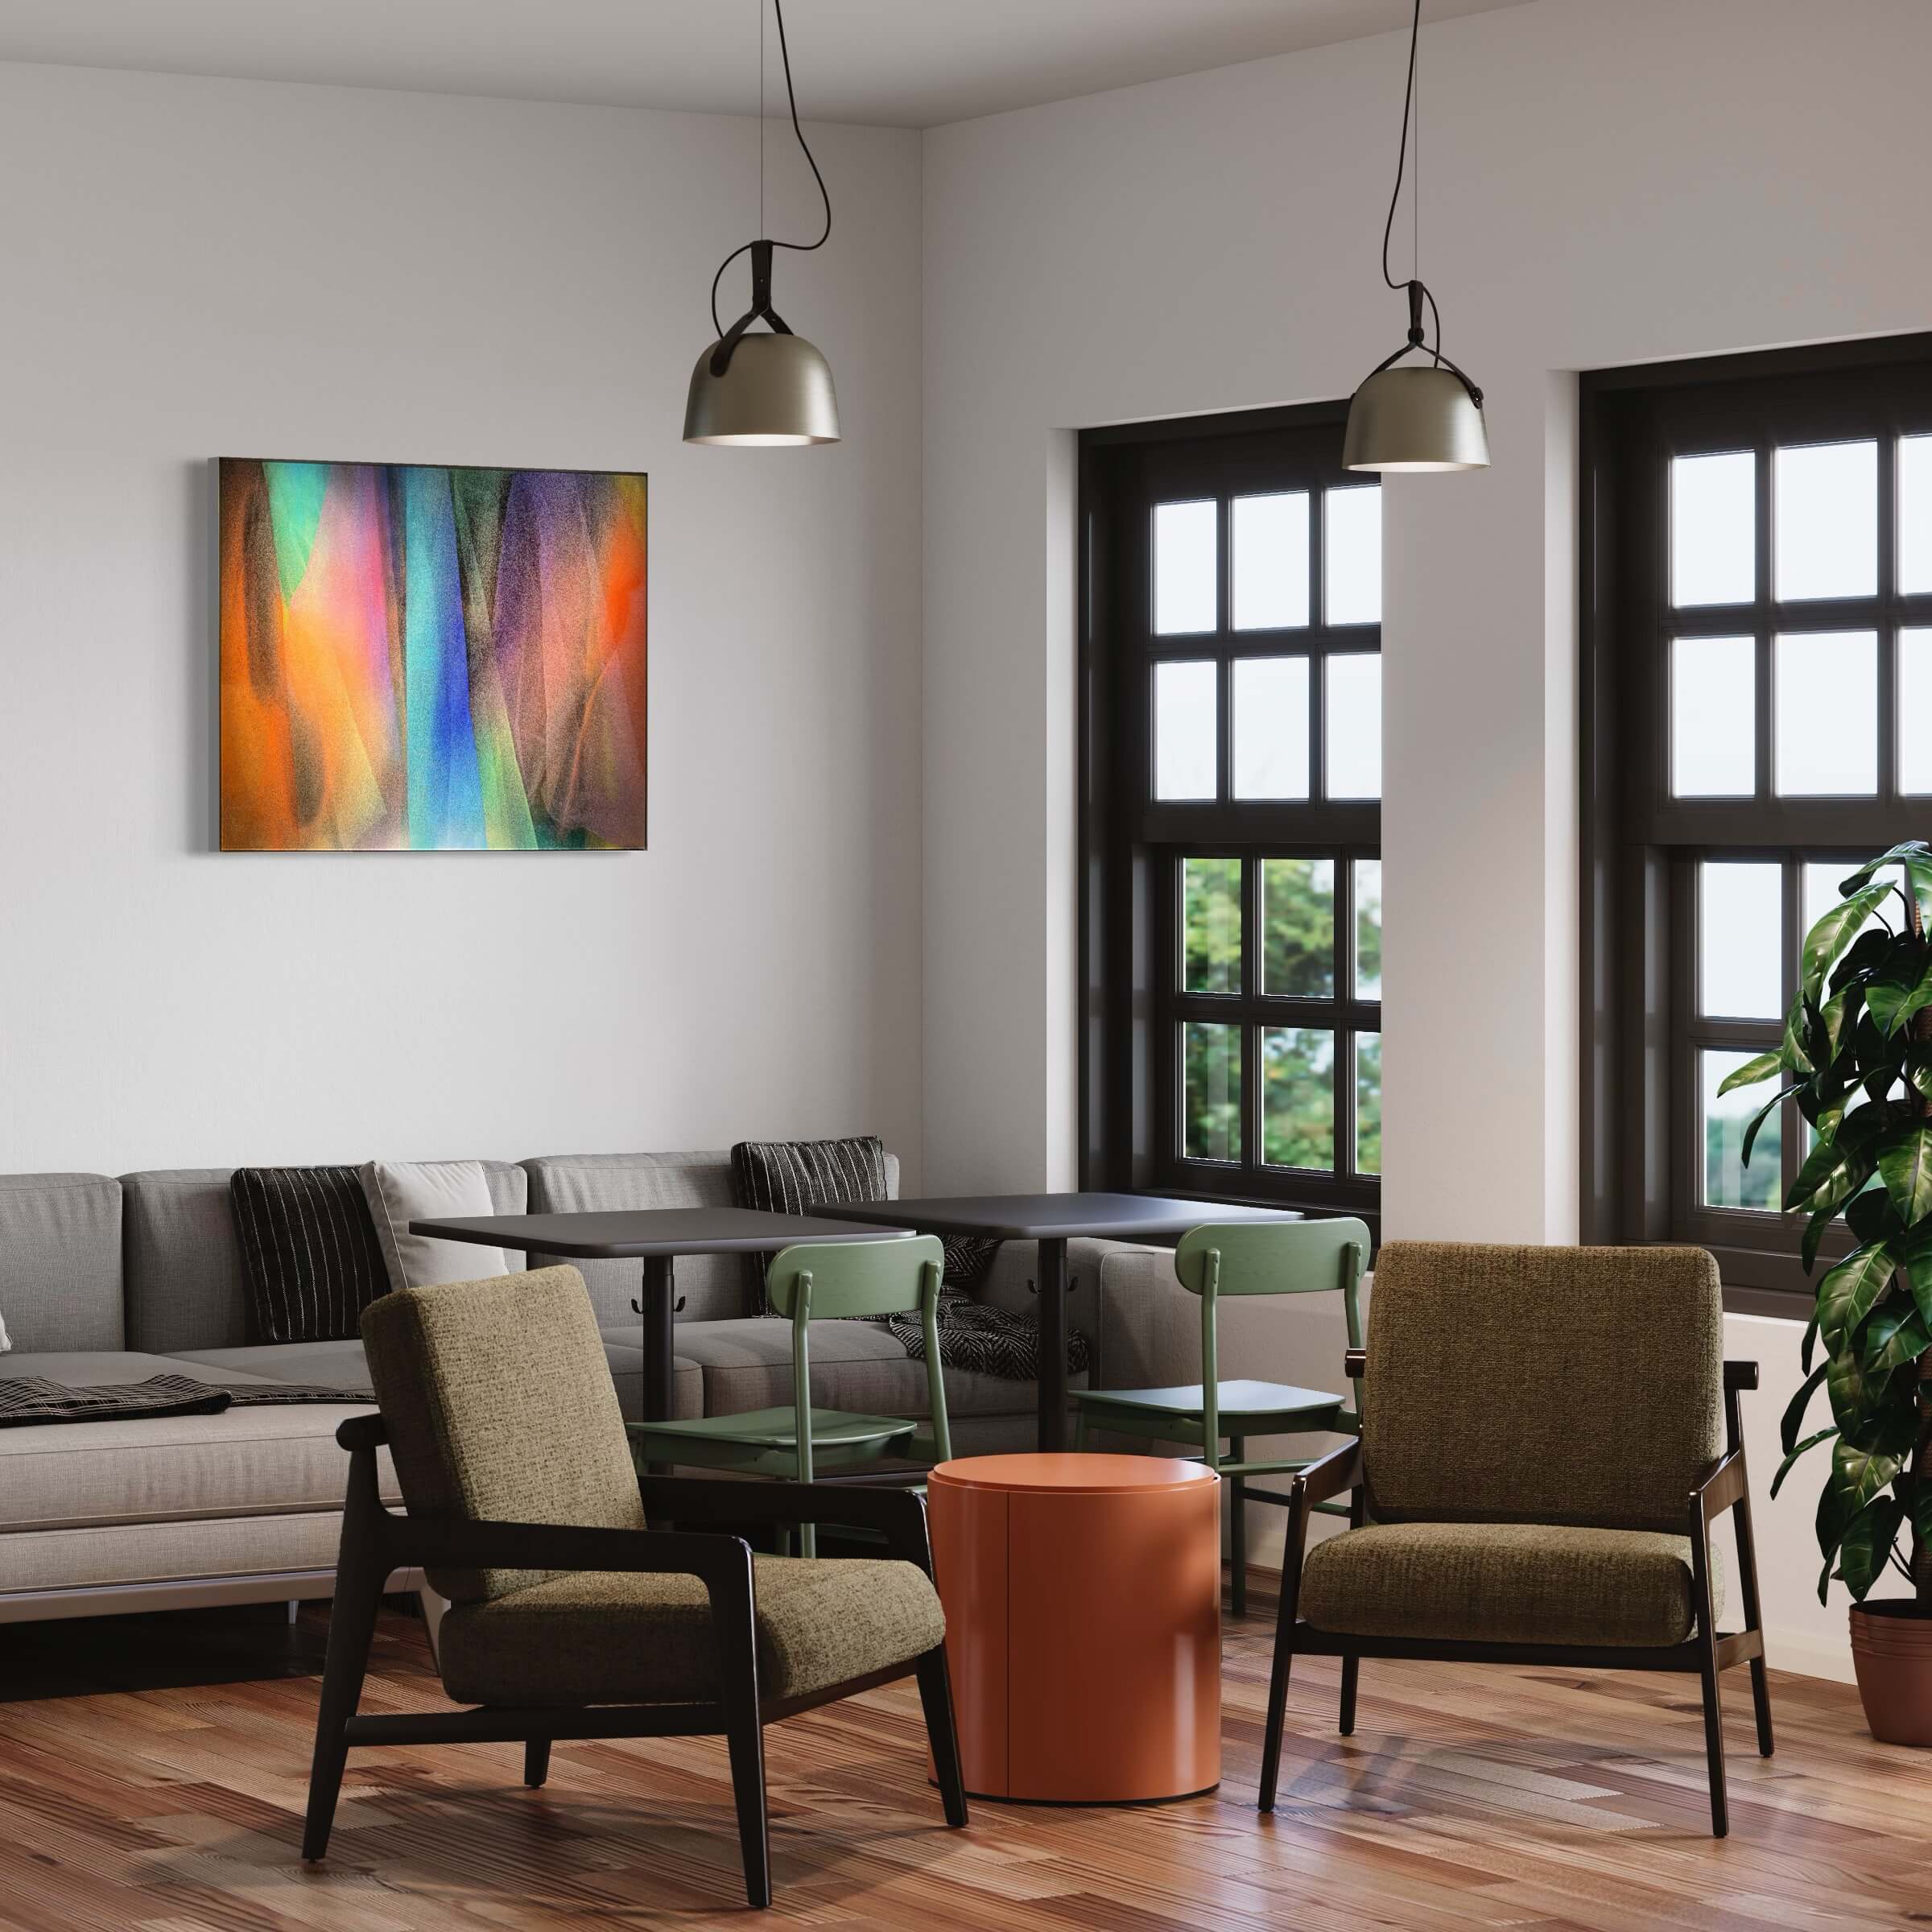 This is a modern room with the "Emotional Spectrum" on the wall. There's a gray sofa, stylish chairs, and a copper table. Light from the windows fills the space, and two lamps hang from the ceiling.